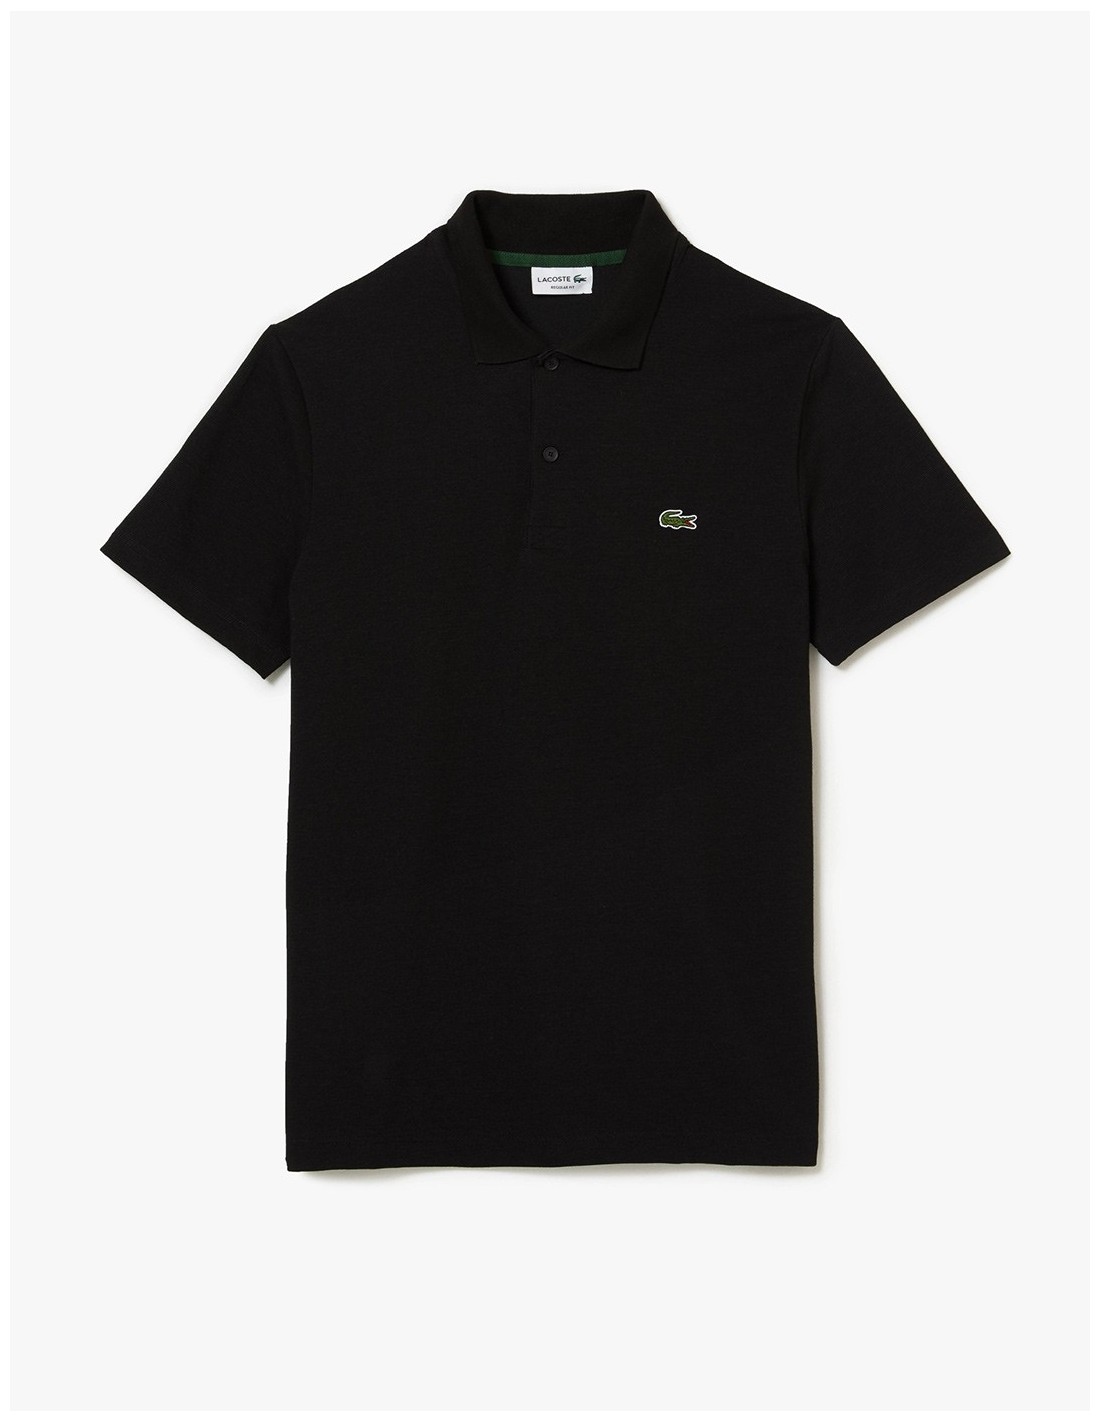 POLO LACOSTE REGULAR FIT NEGRO